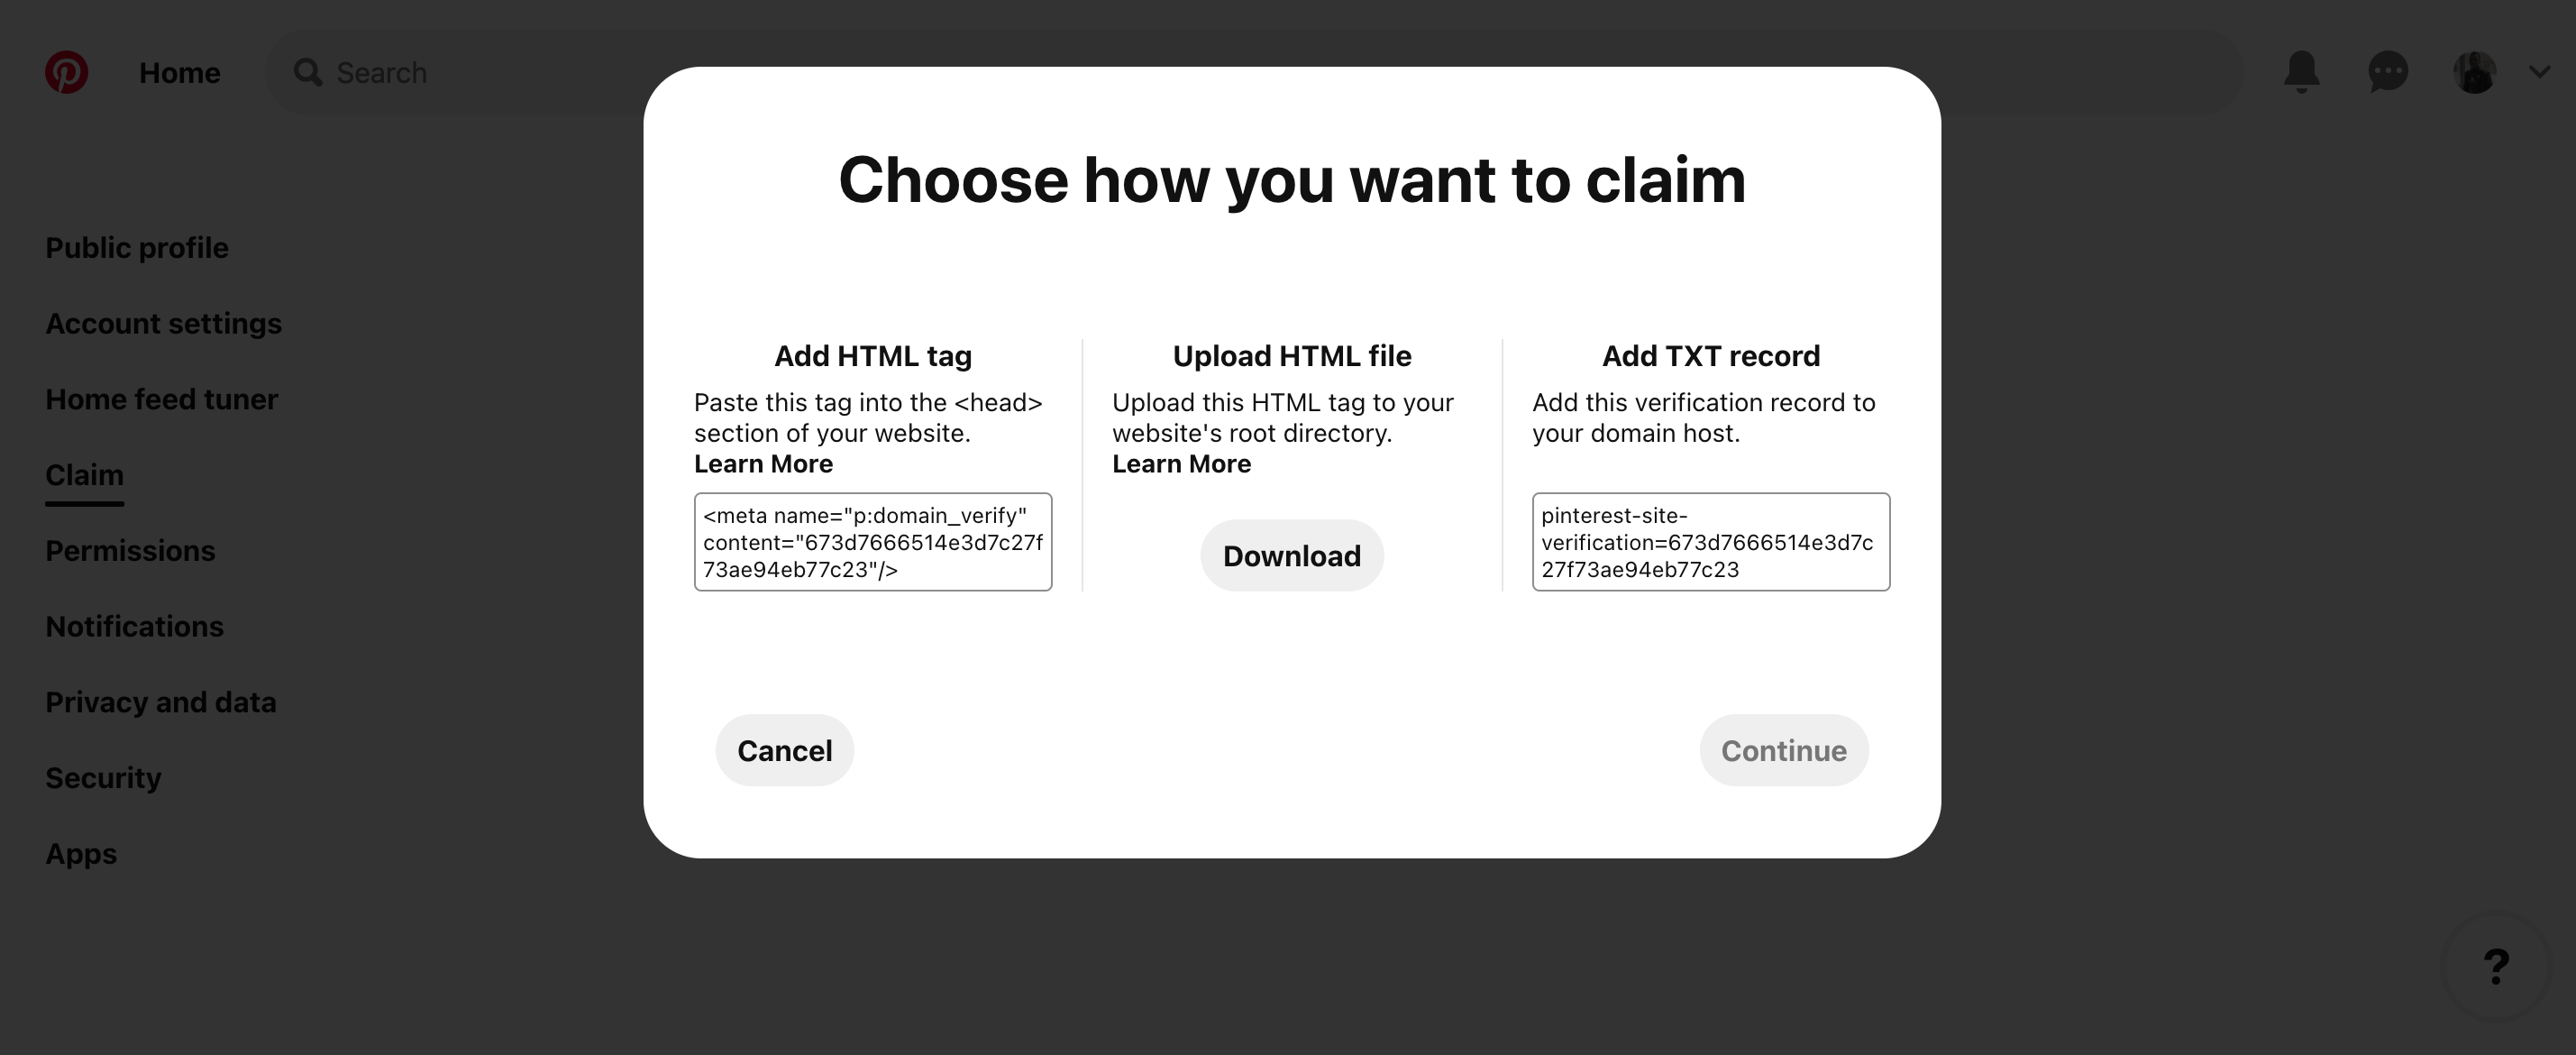 Choose how you want to claim your account